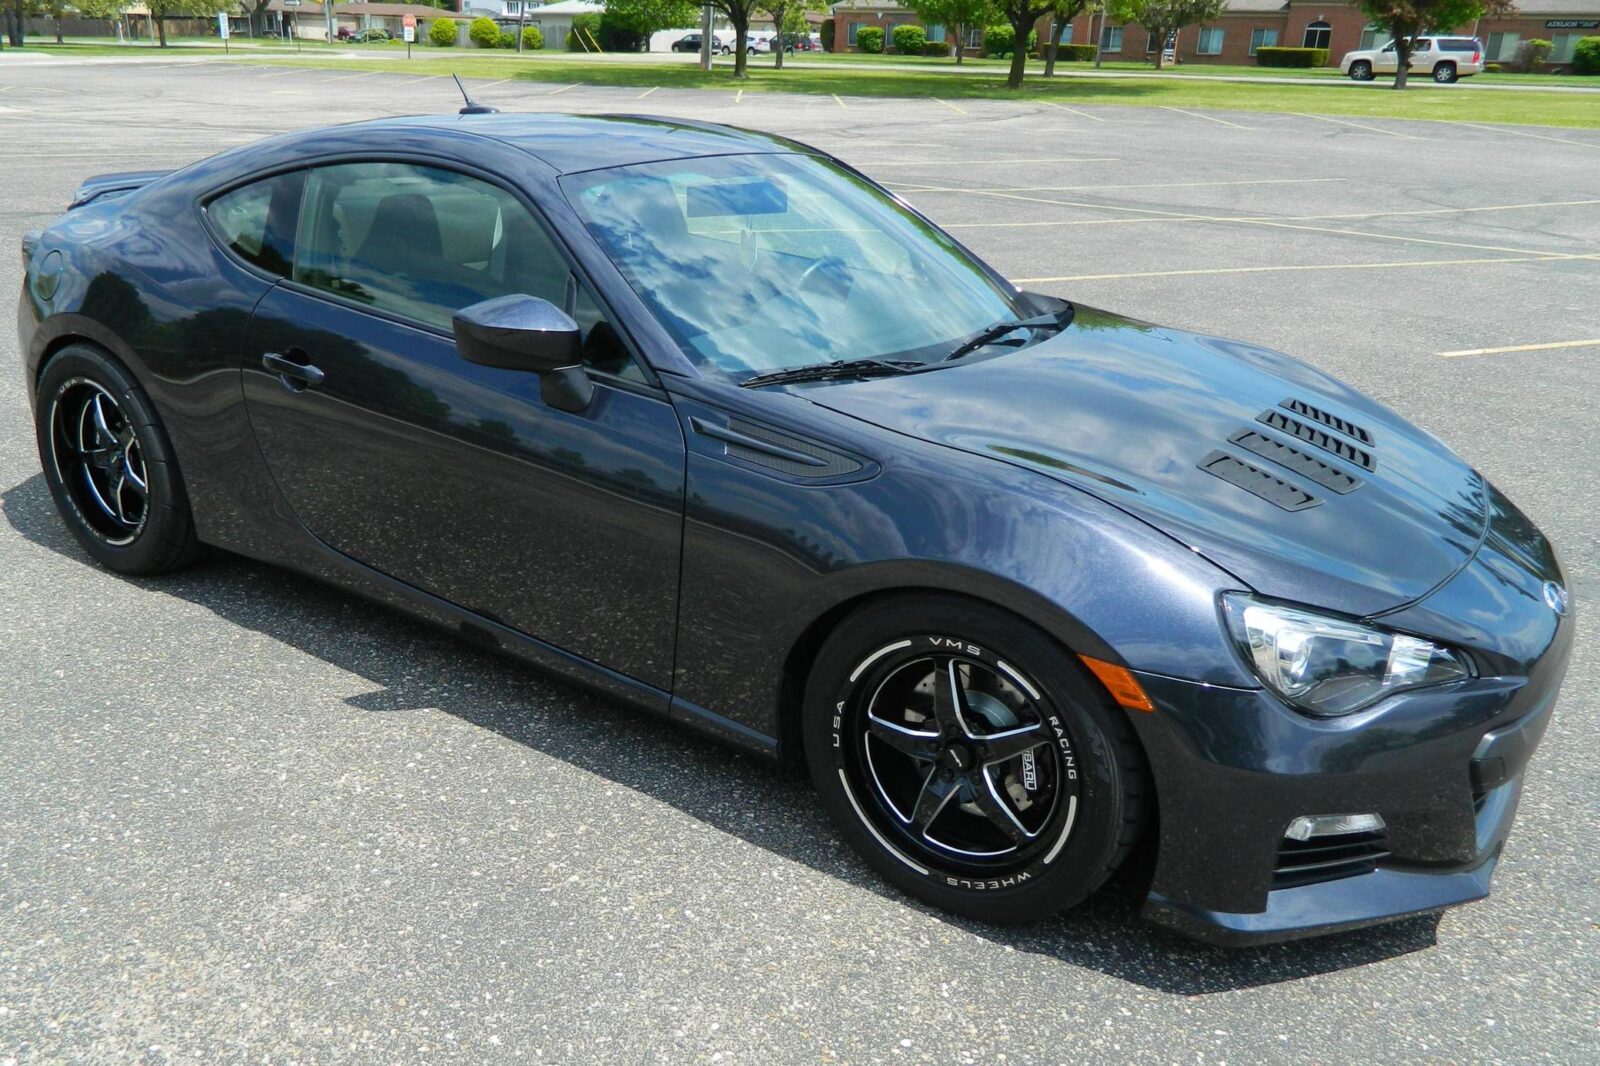 What Kind of Oil Does a 2014 Brz Take?